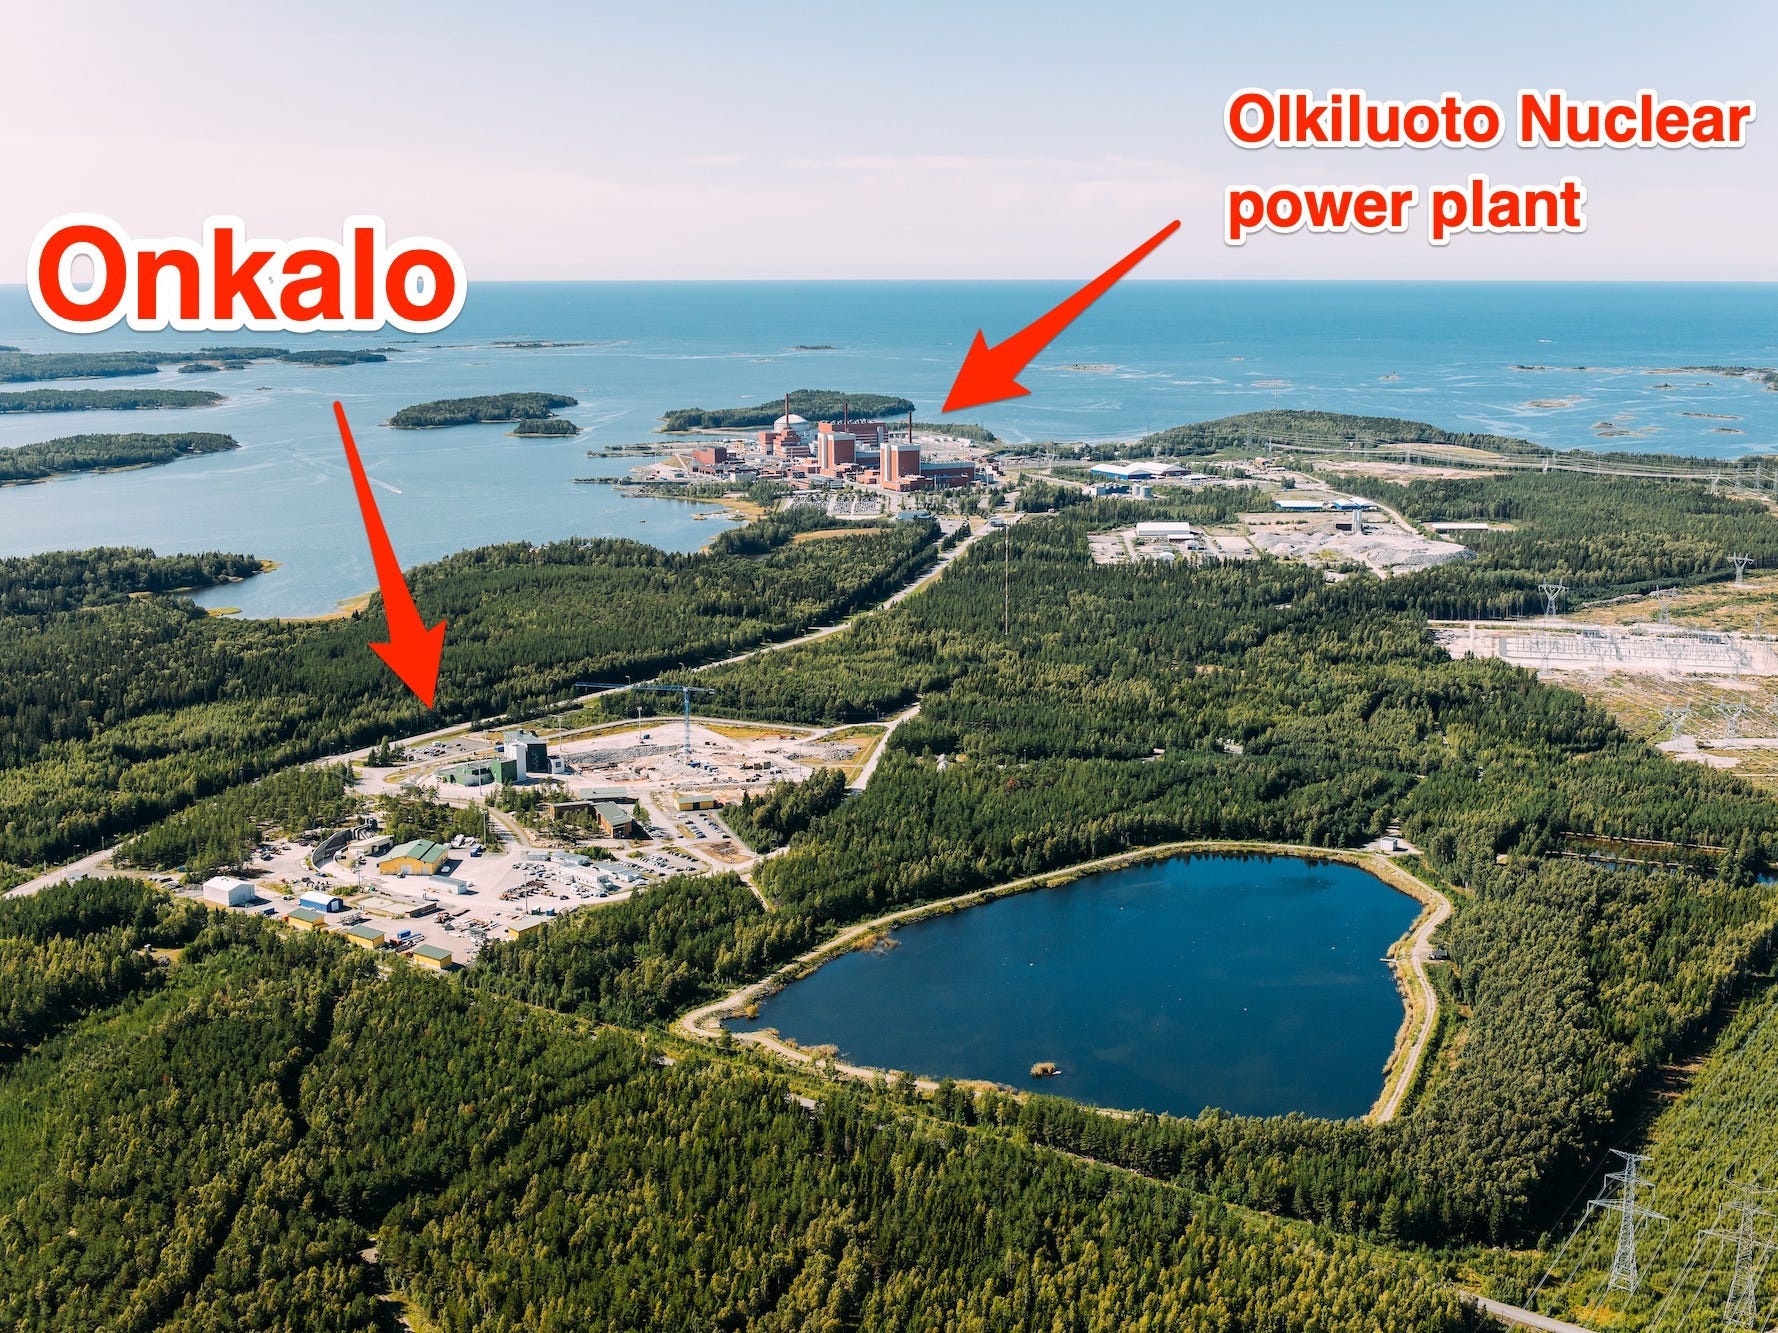 An aerial view of the site is annotated to show the location of the Olkiluoto nuclear power plant and of Onkalo.